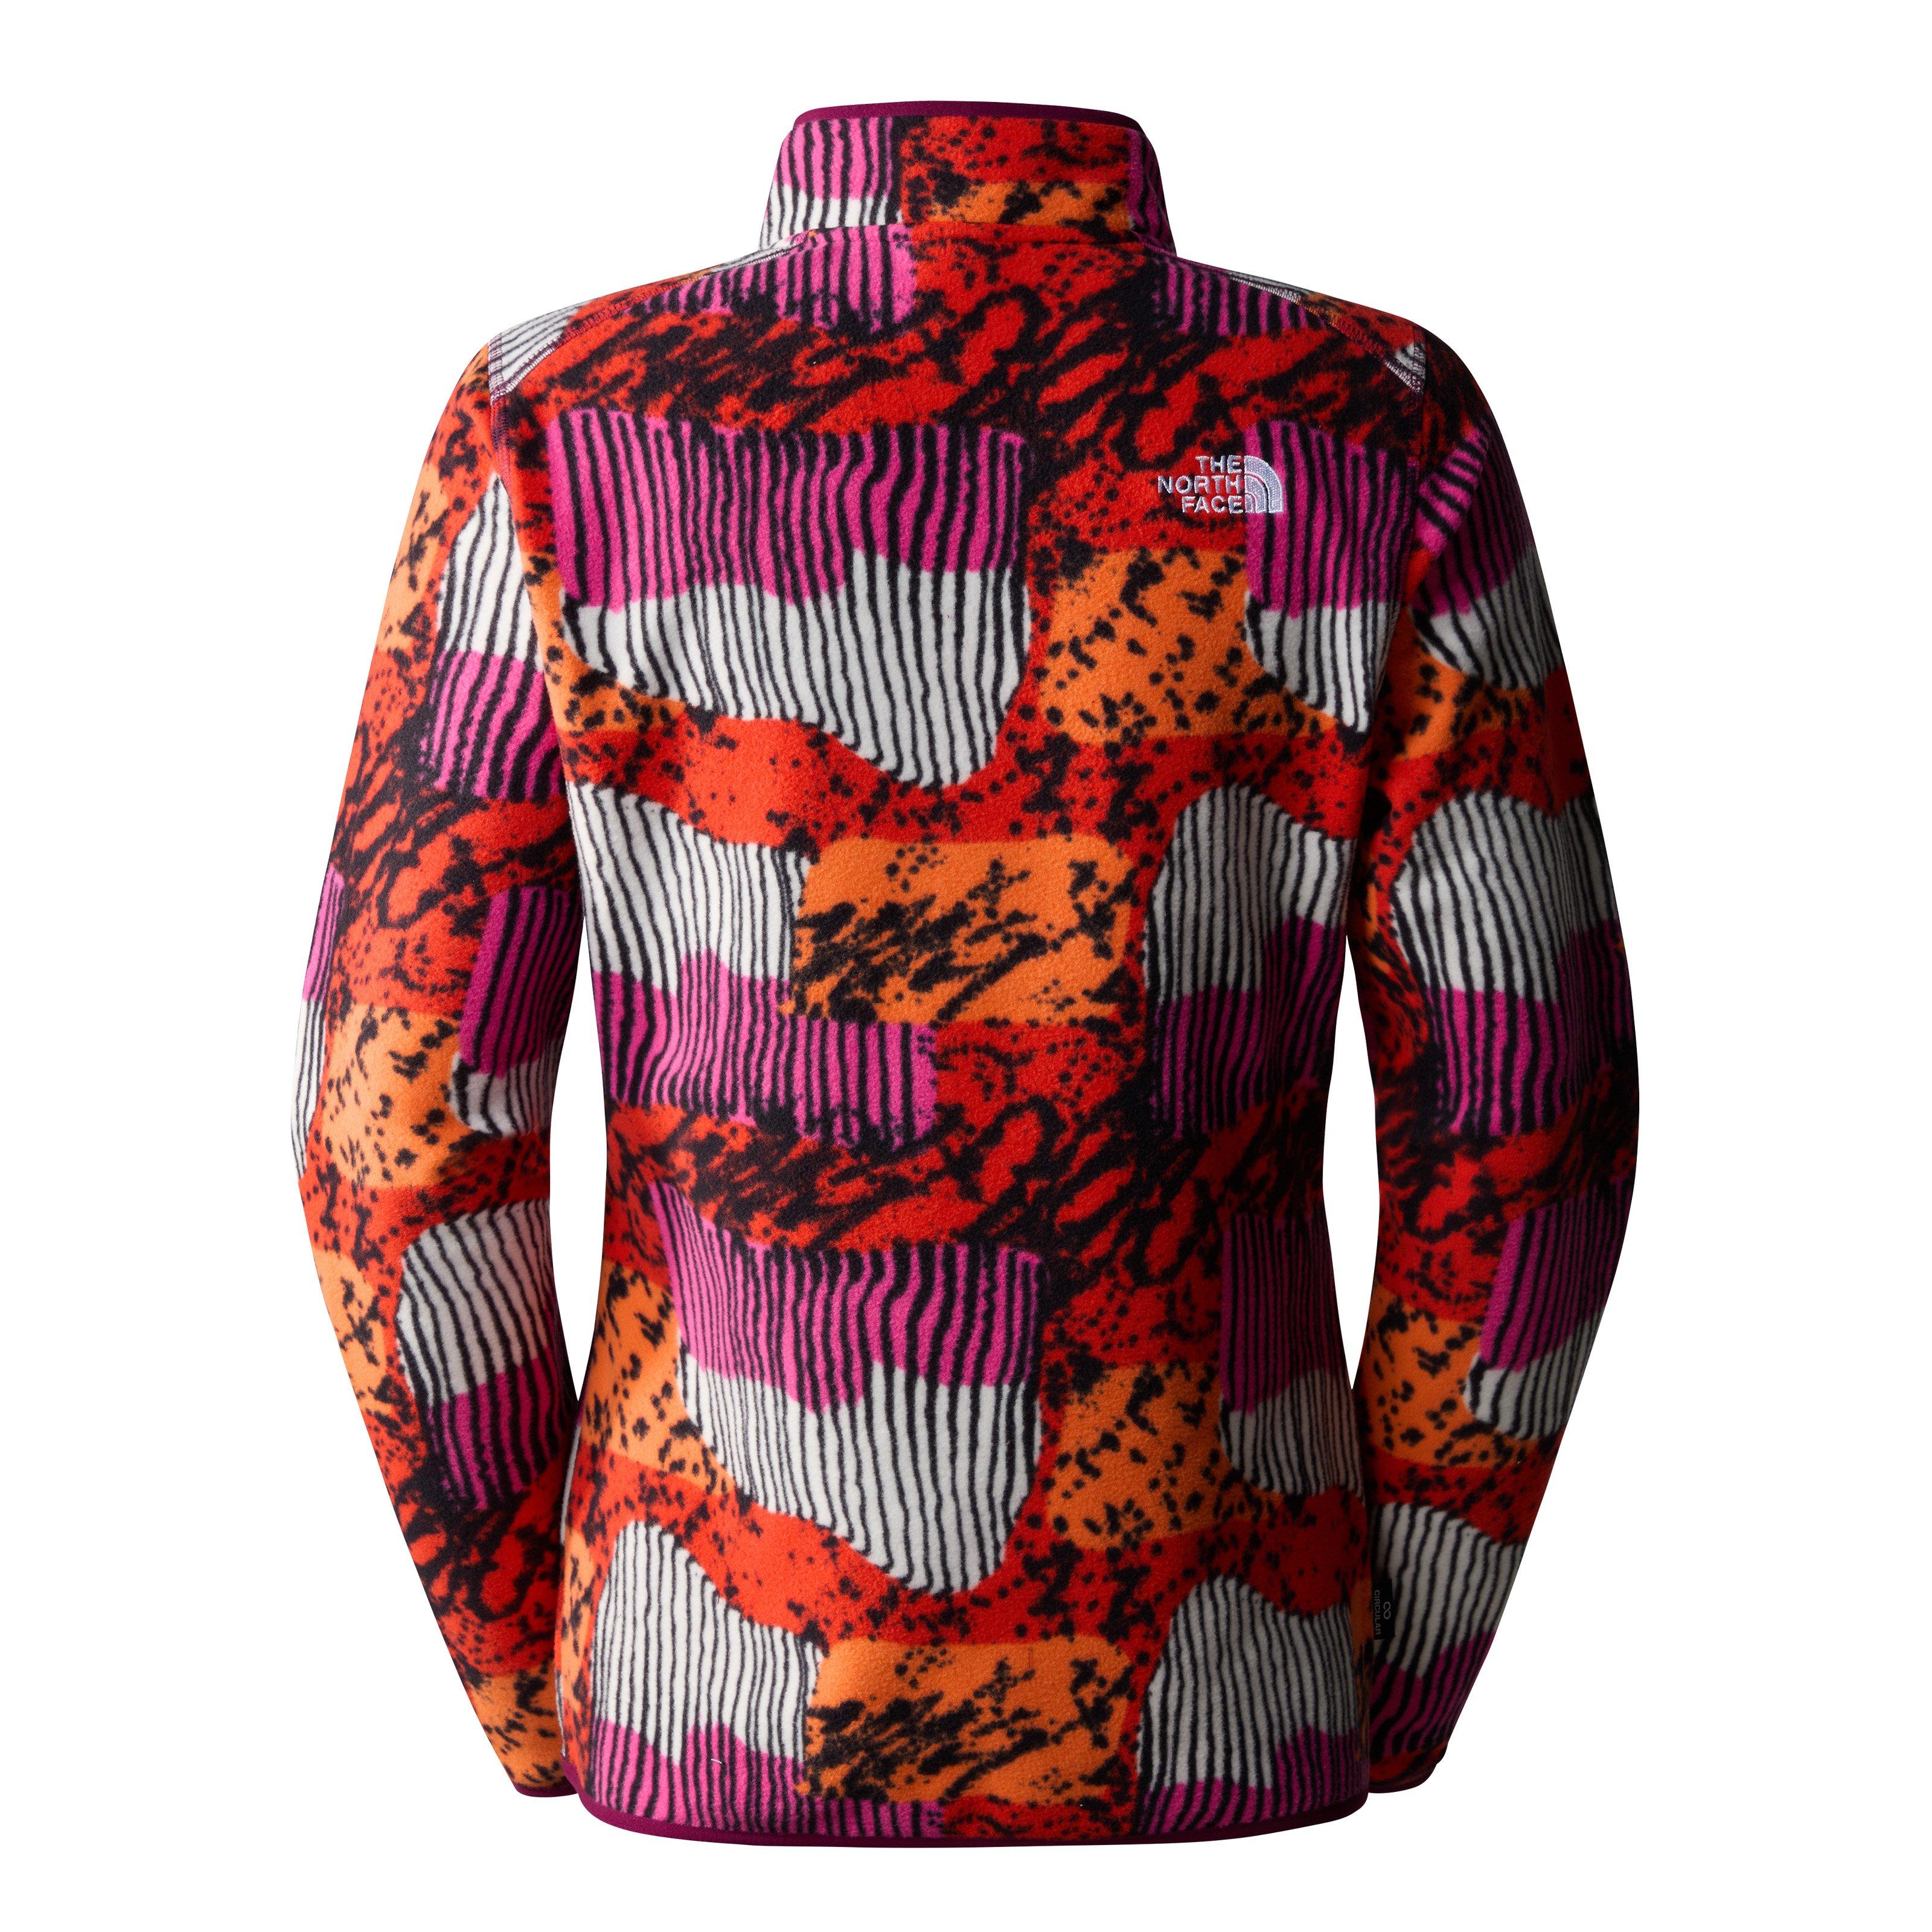 The North Face Women's 100 Glacier 1/4 Zip Printed Fleece - Fiery Red  Yosemite | George Fisher